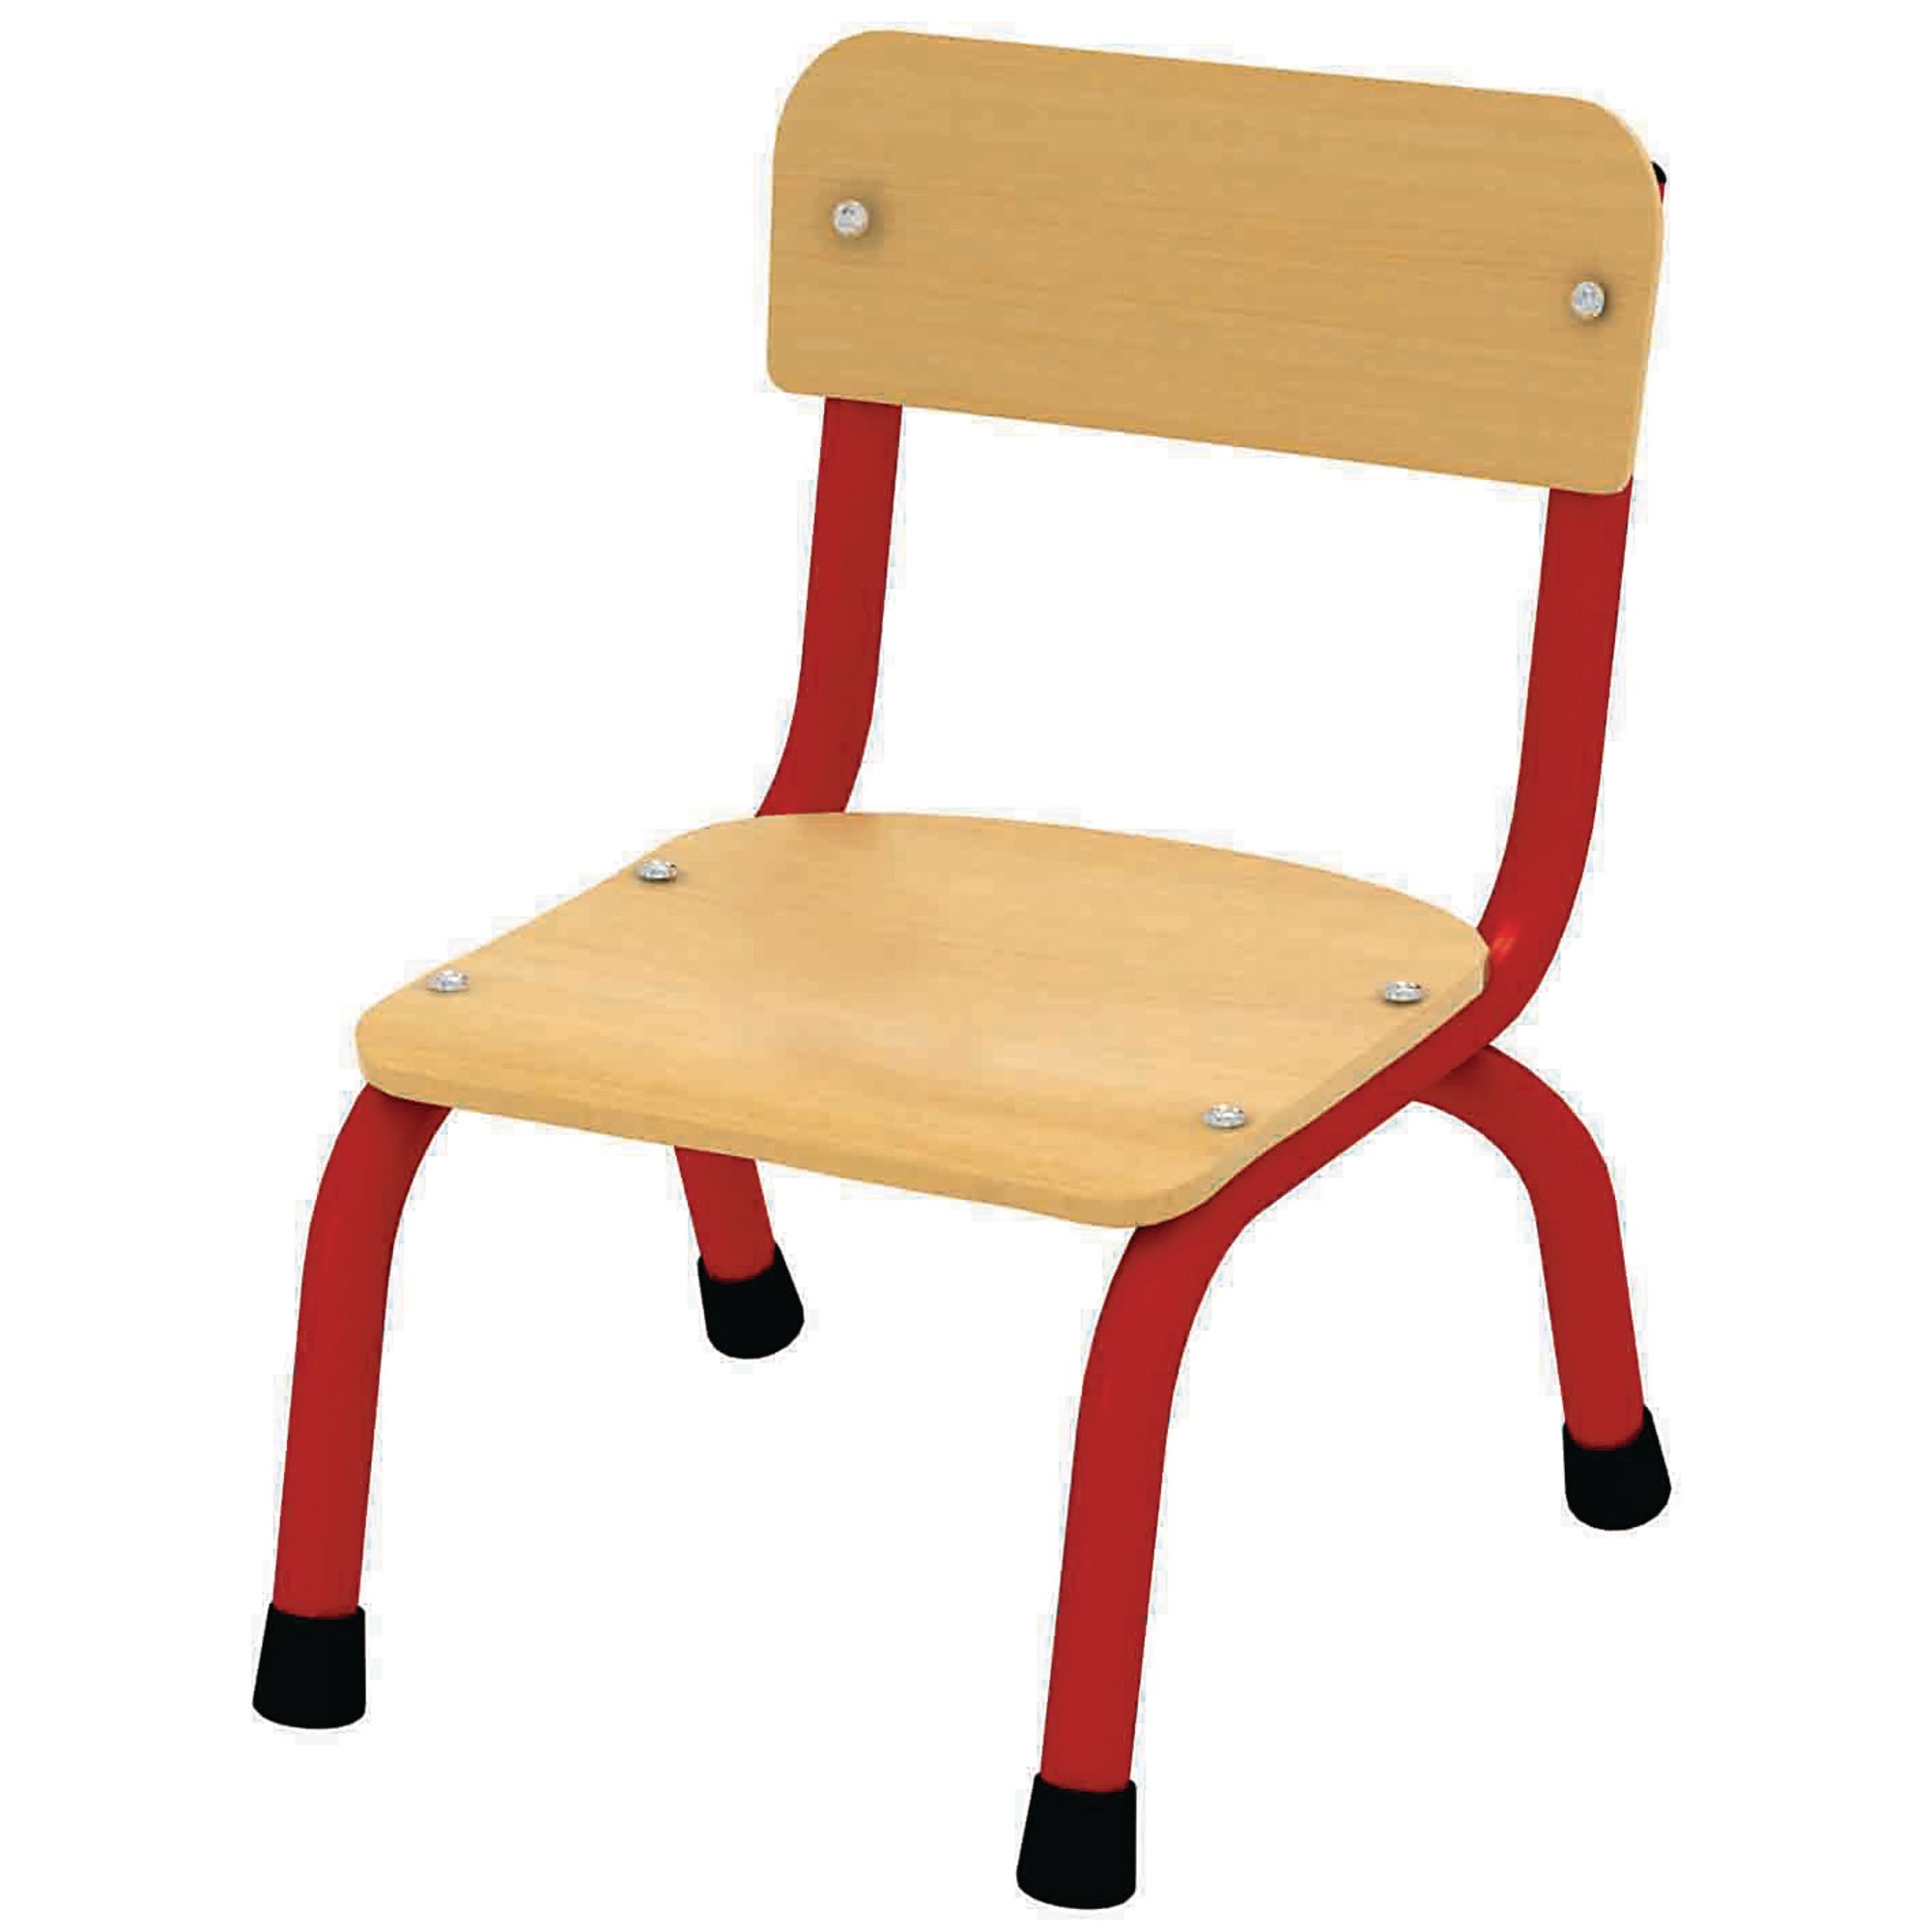 Milan 210mm Seat Height Chairs - Age 2-3 - Red - Set of 4